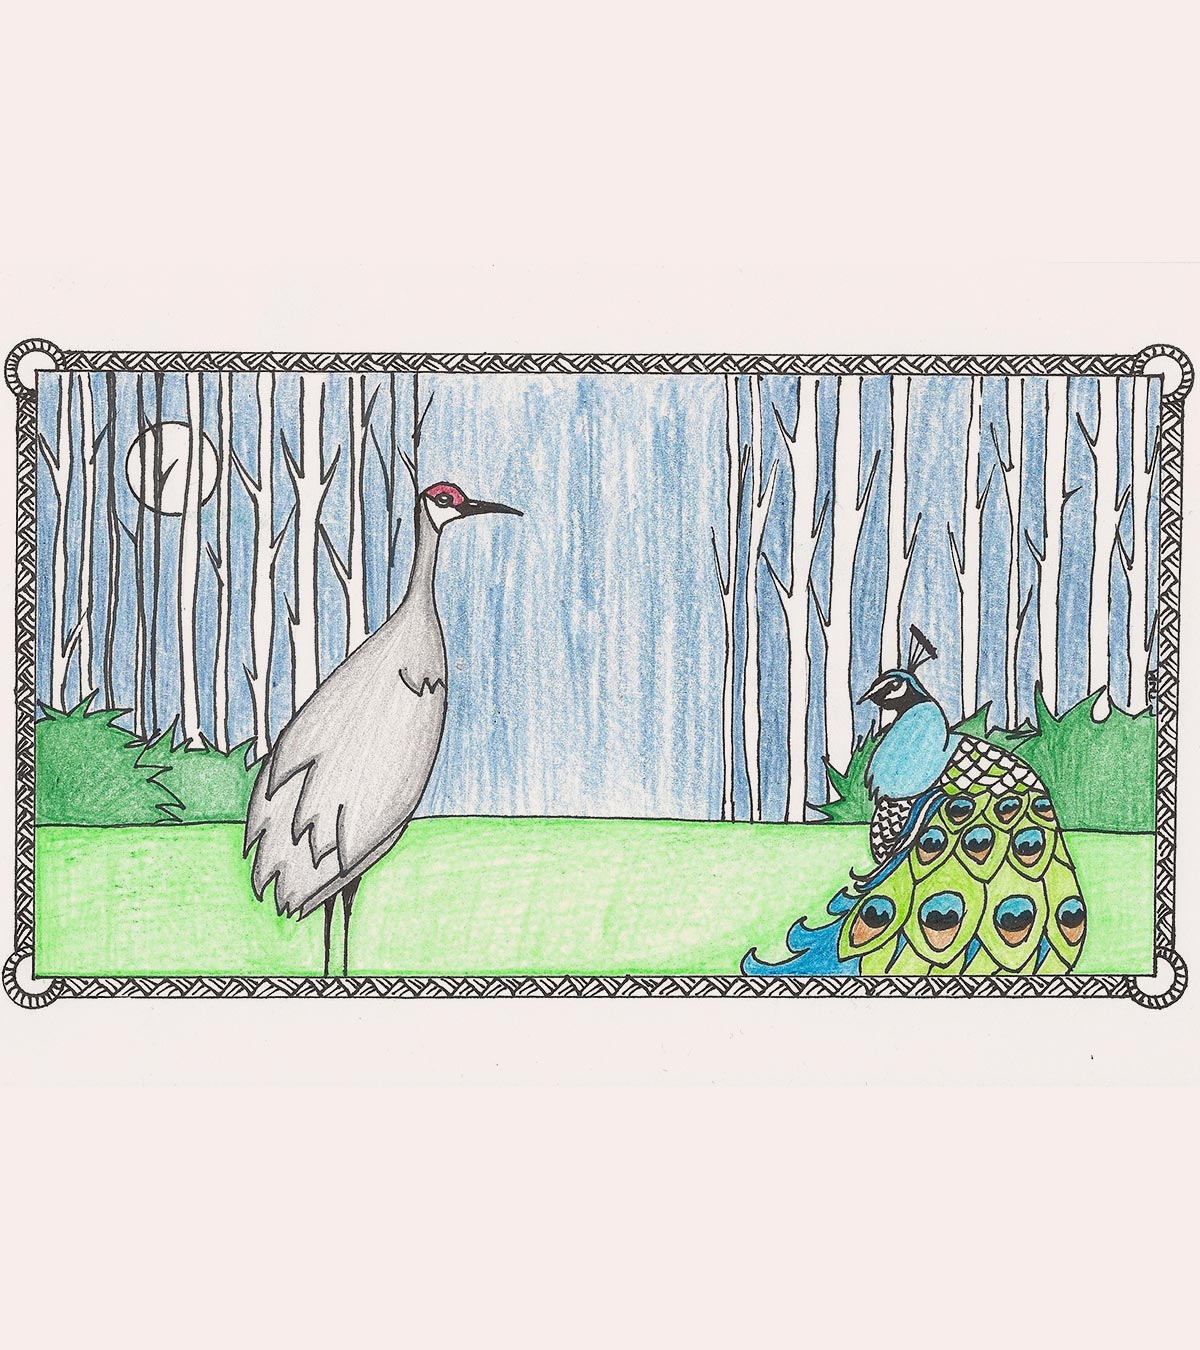 'The Peacock And The Crane Story' For Your Kids